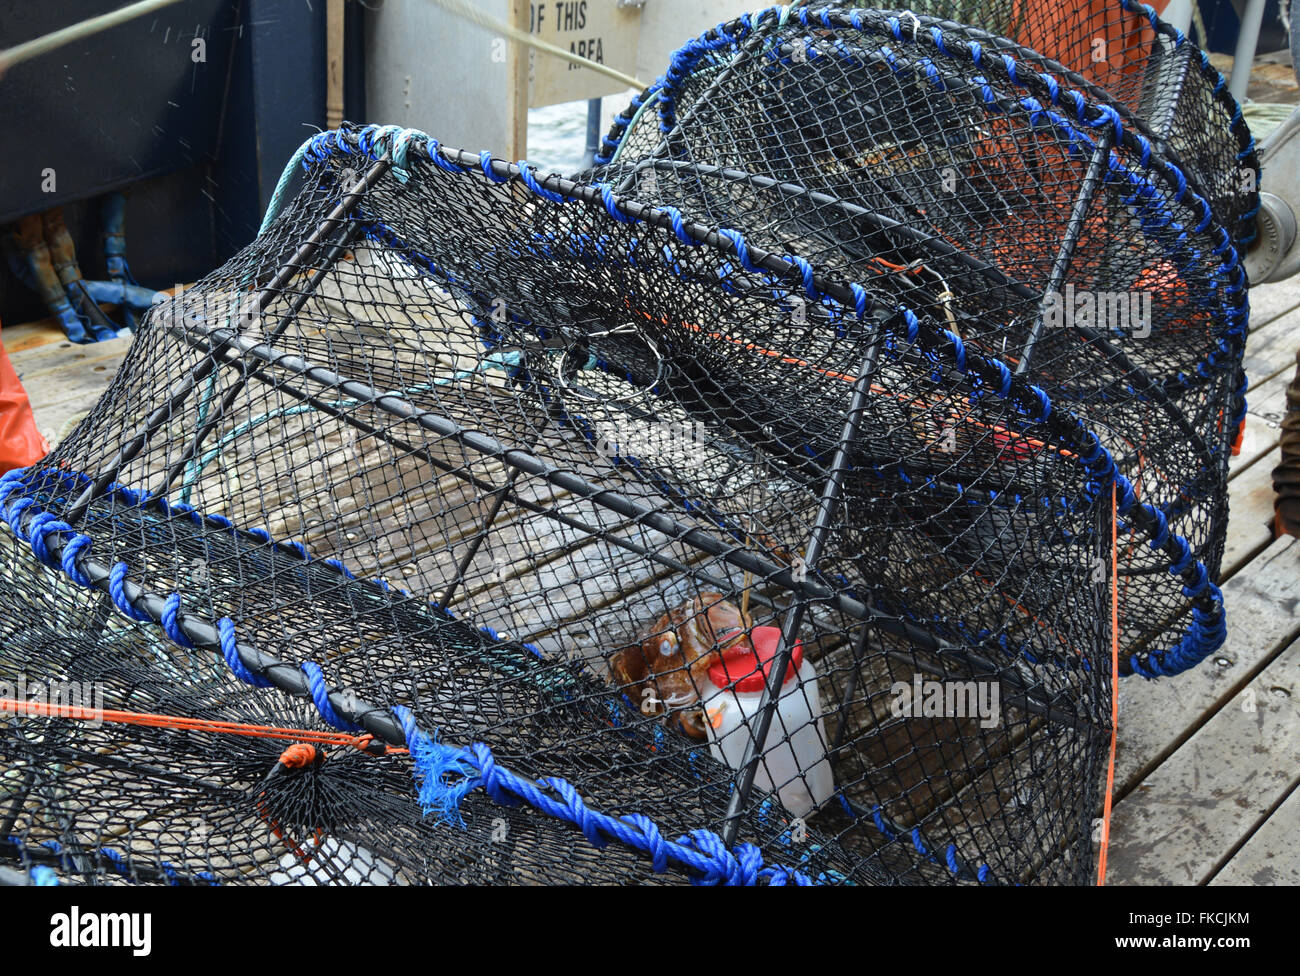 A line of baited shrimp cages is ready to launch into the ocean. Stock Photo